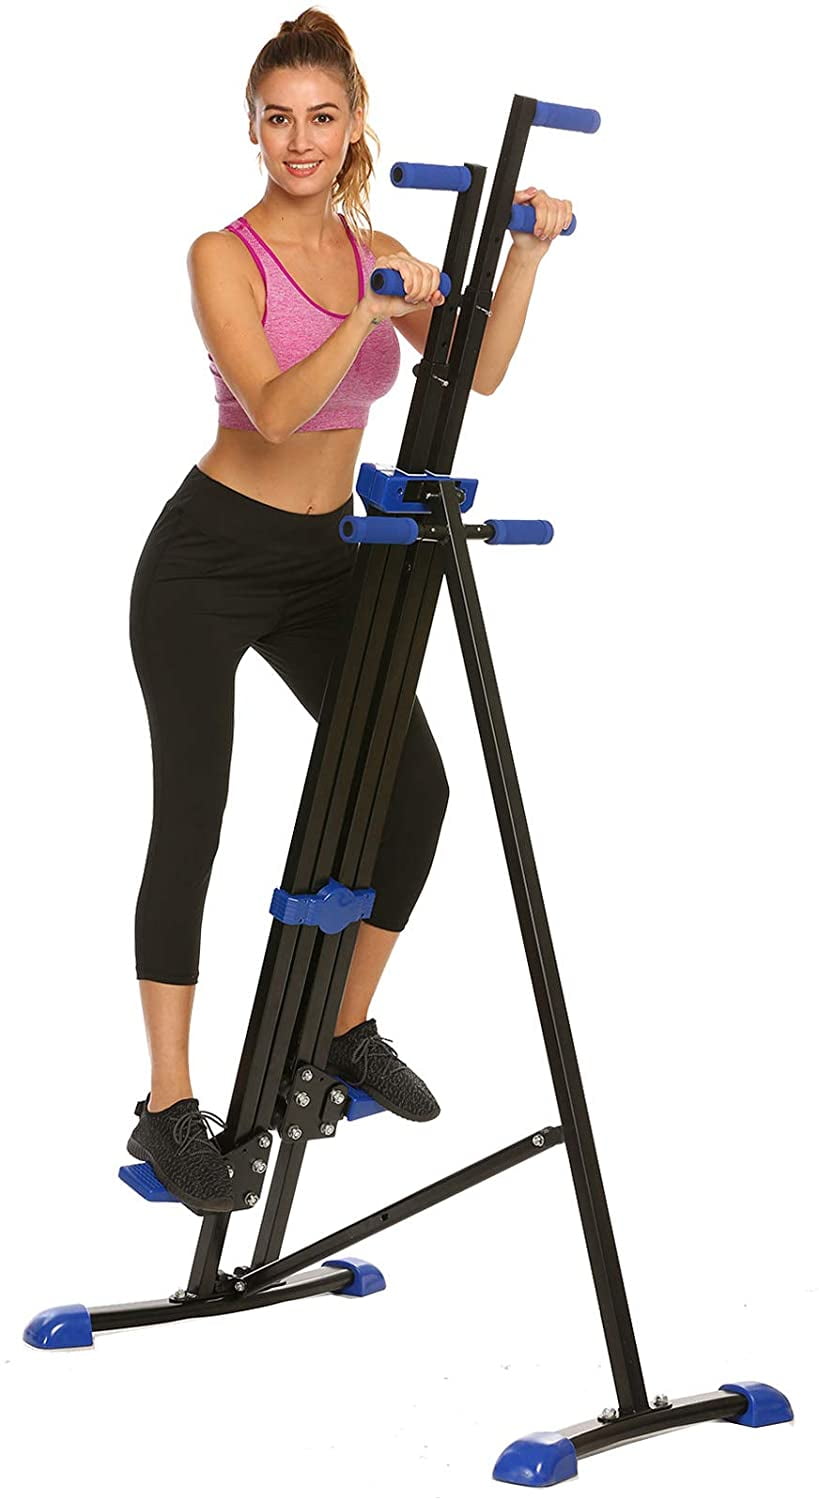 Foldable Stair Stepper Fitness Exercise Large Handle Bar Machine Cardio Workout 